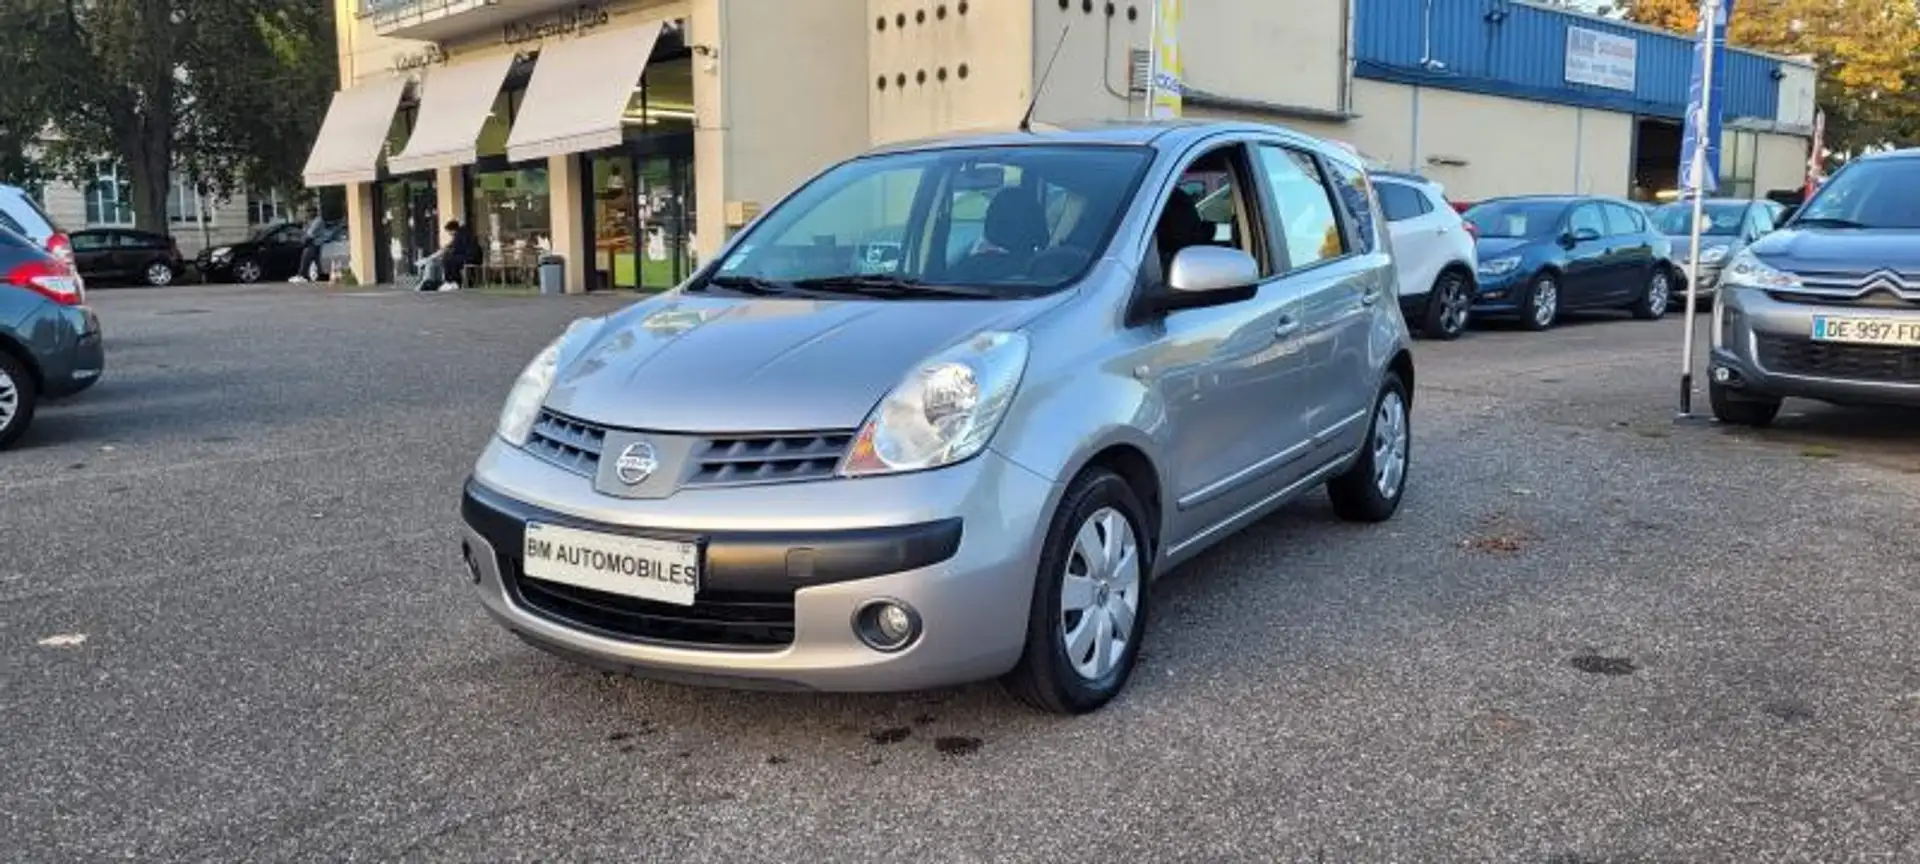 Nissan Note 1.5 dci 85 cv mix - 1